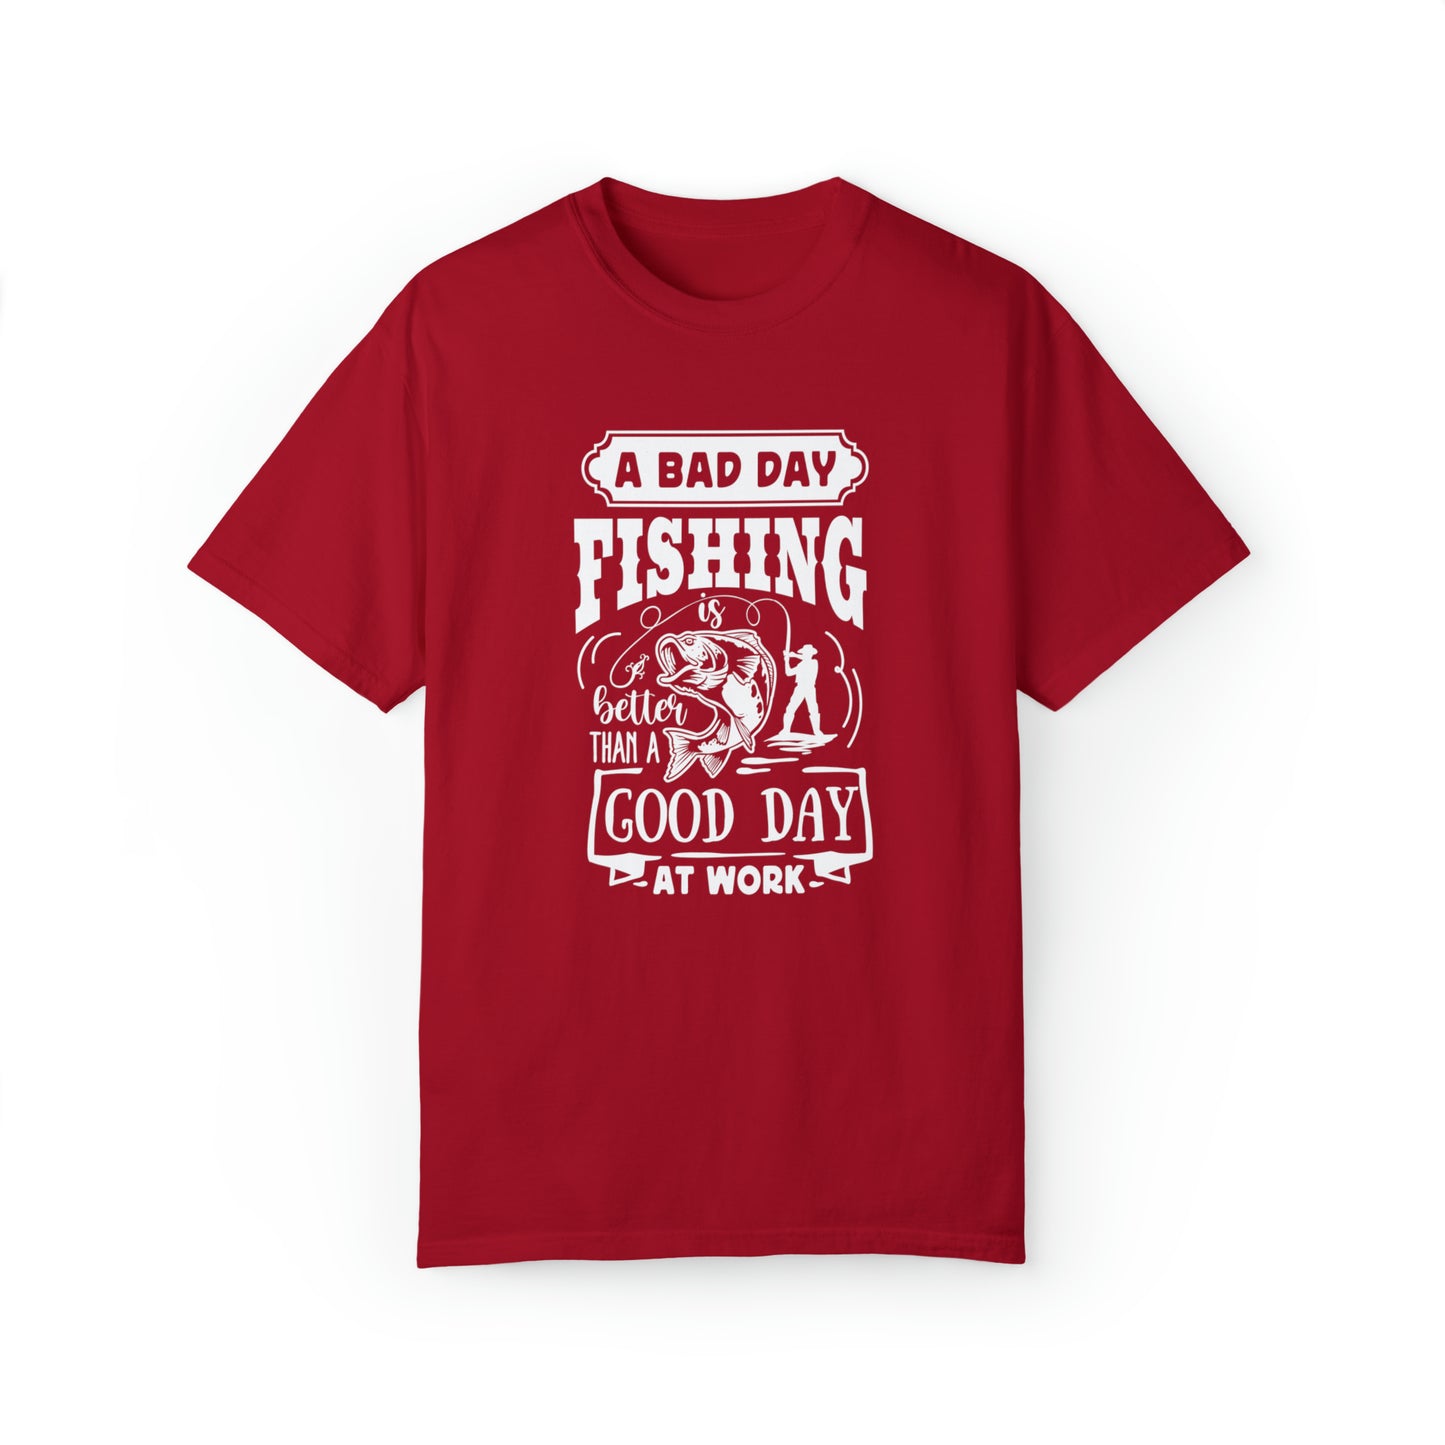 Embrace the Outdoors: A Tough Day Fishing Beats a Great Day at the Office T-shirt